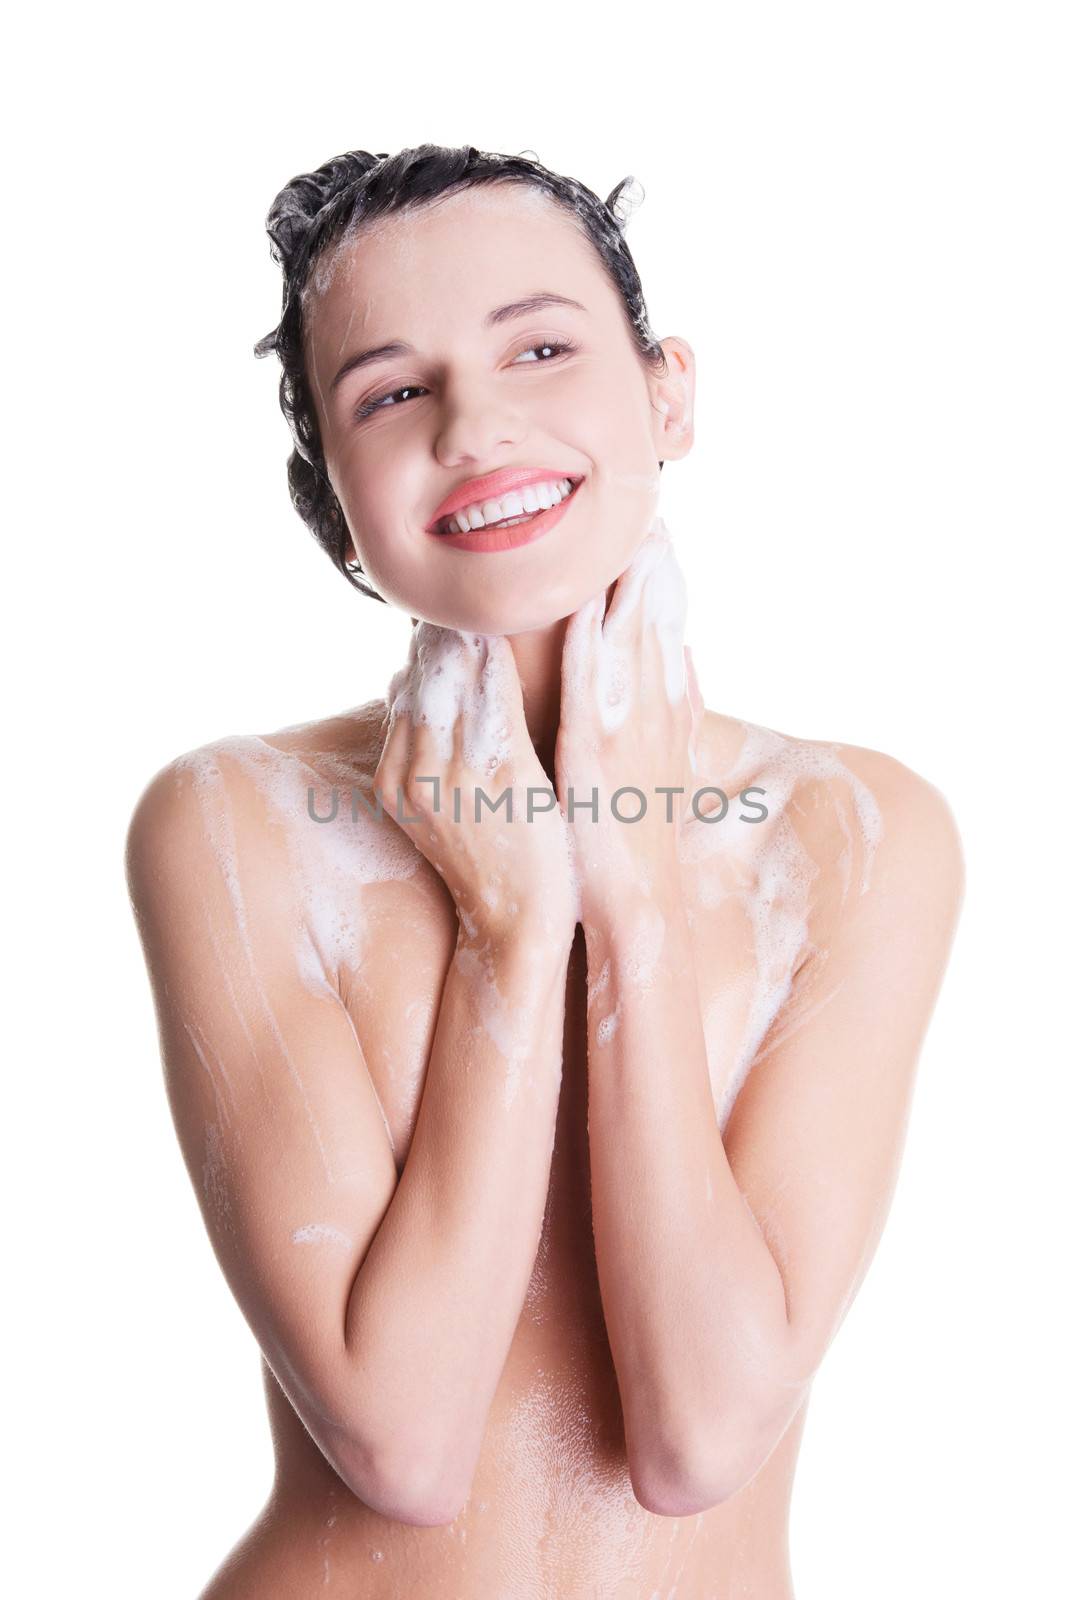 Young fit woman in shower washing her body